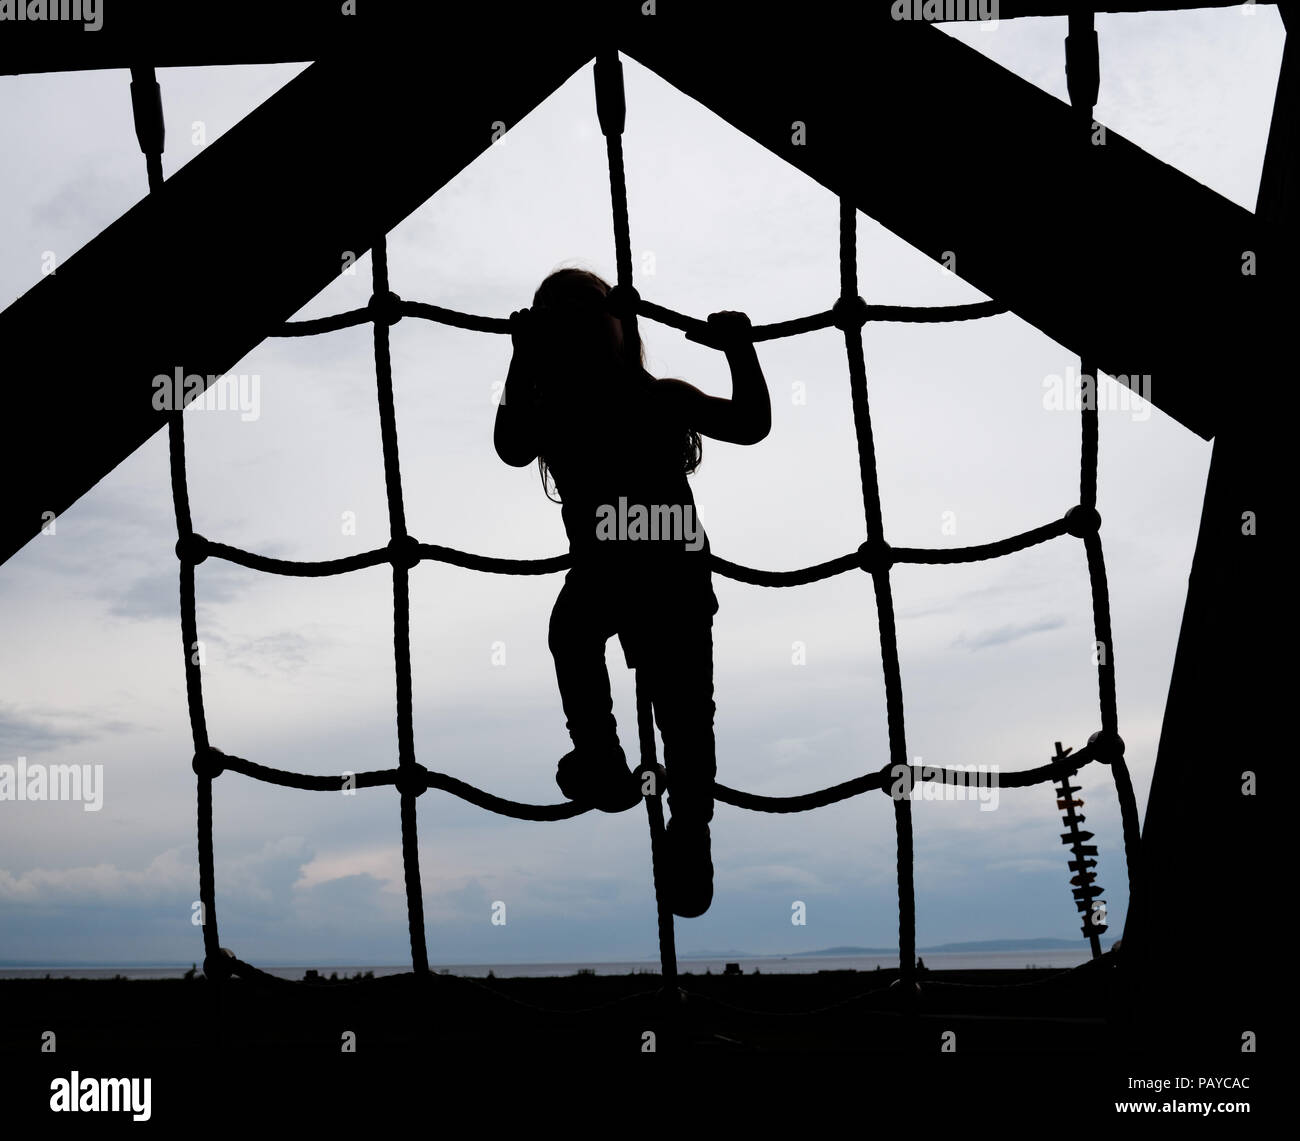 A silhouette of a three year old girl climbing a rope ladder Stock Photo